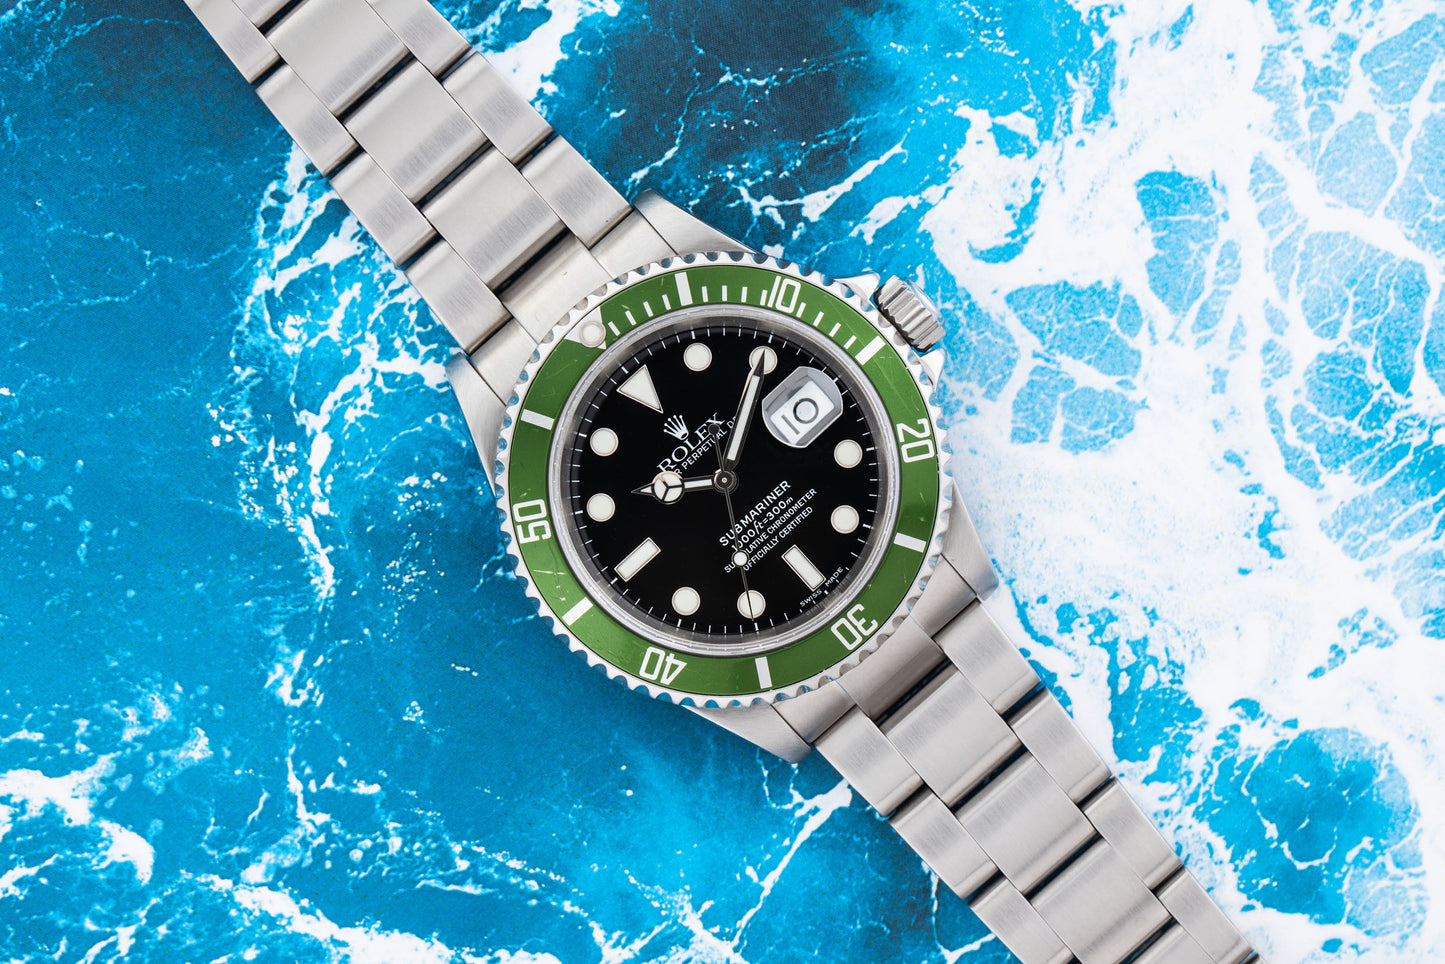 Rolex Oyster Perpetual Submariner Date 300M 50th Anniversary